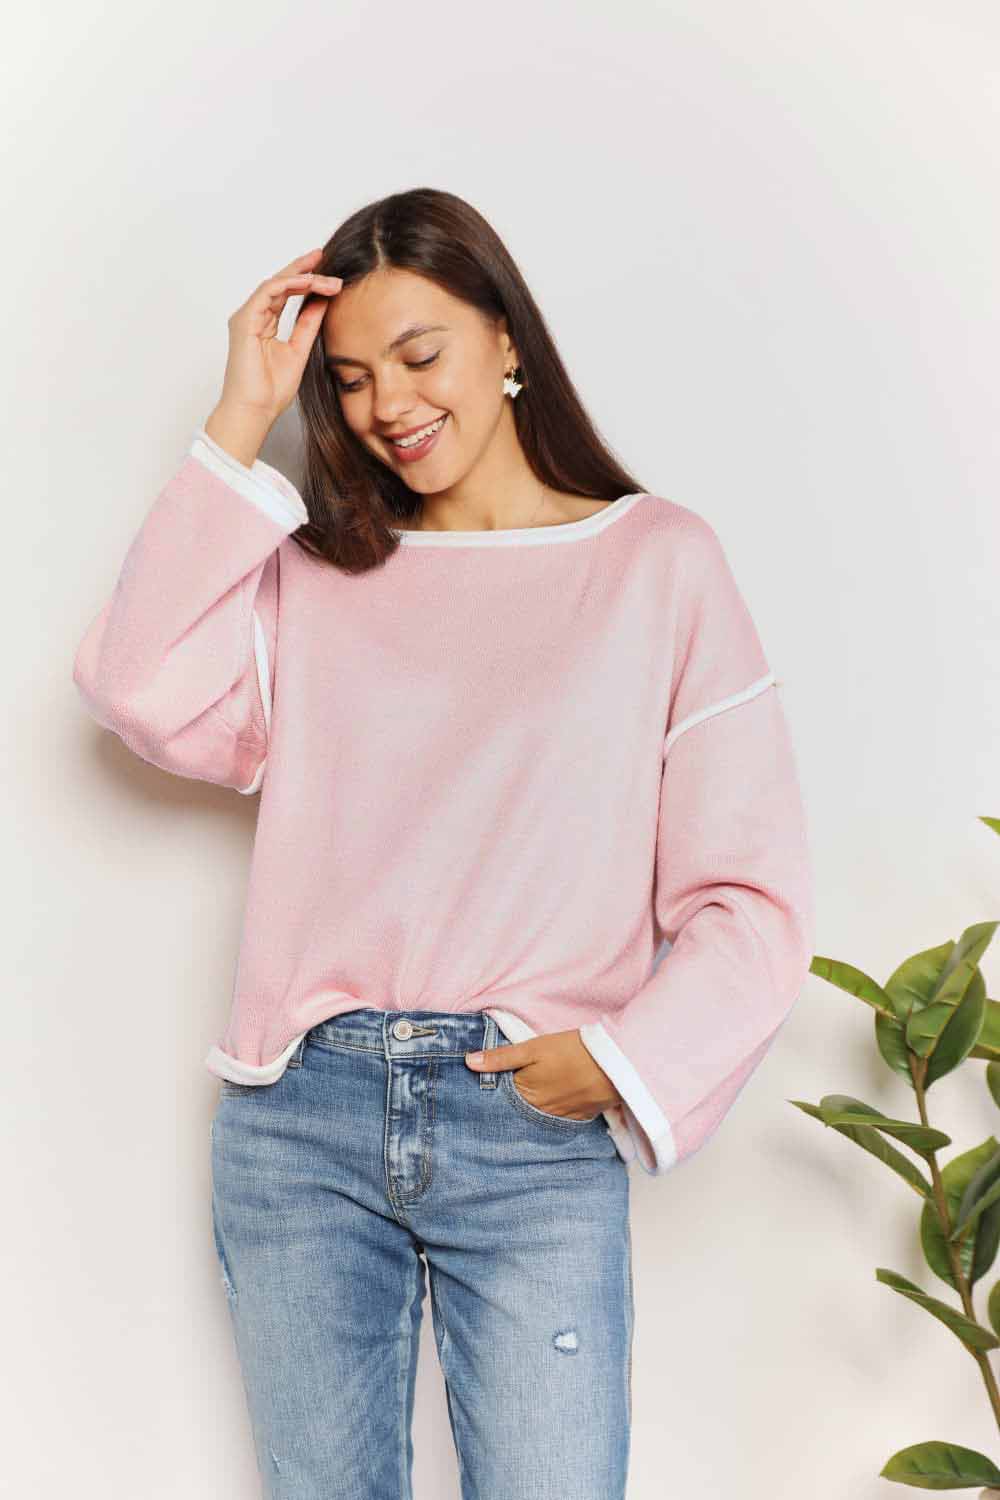 Contrast Detail Dropped Shoulder Knit Top in Blush PinkTopDouble Take